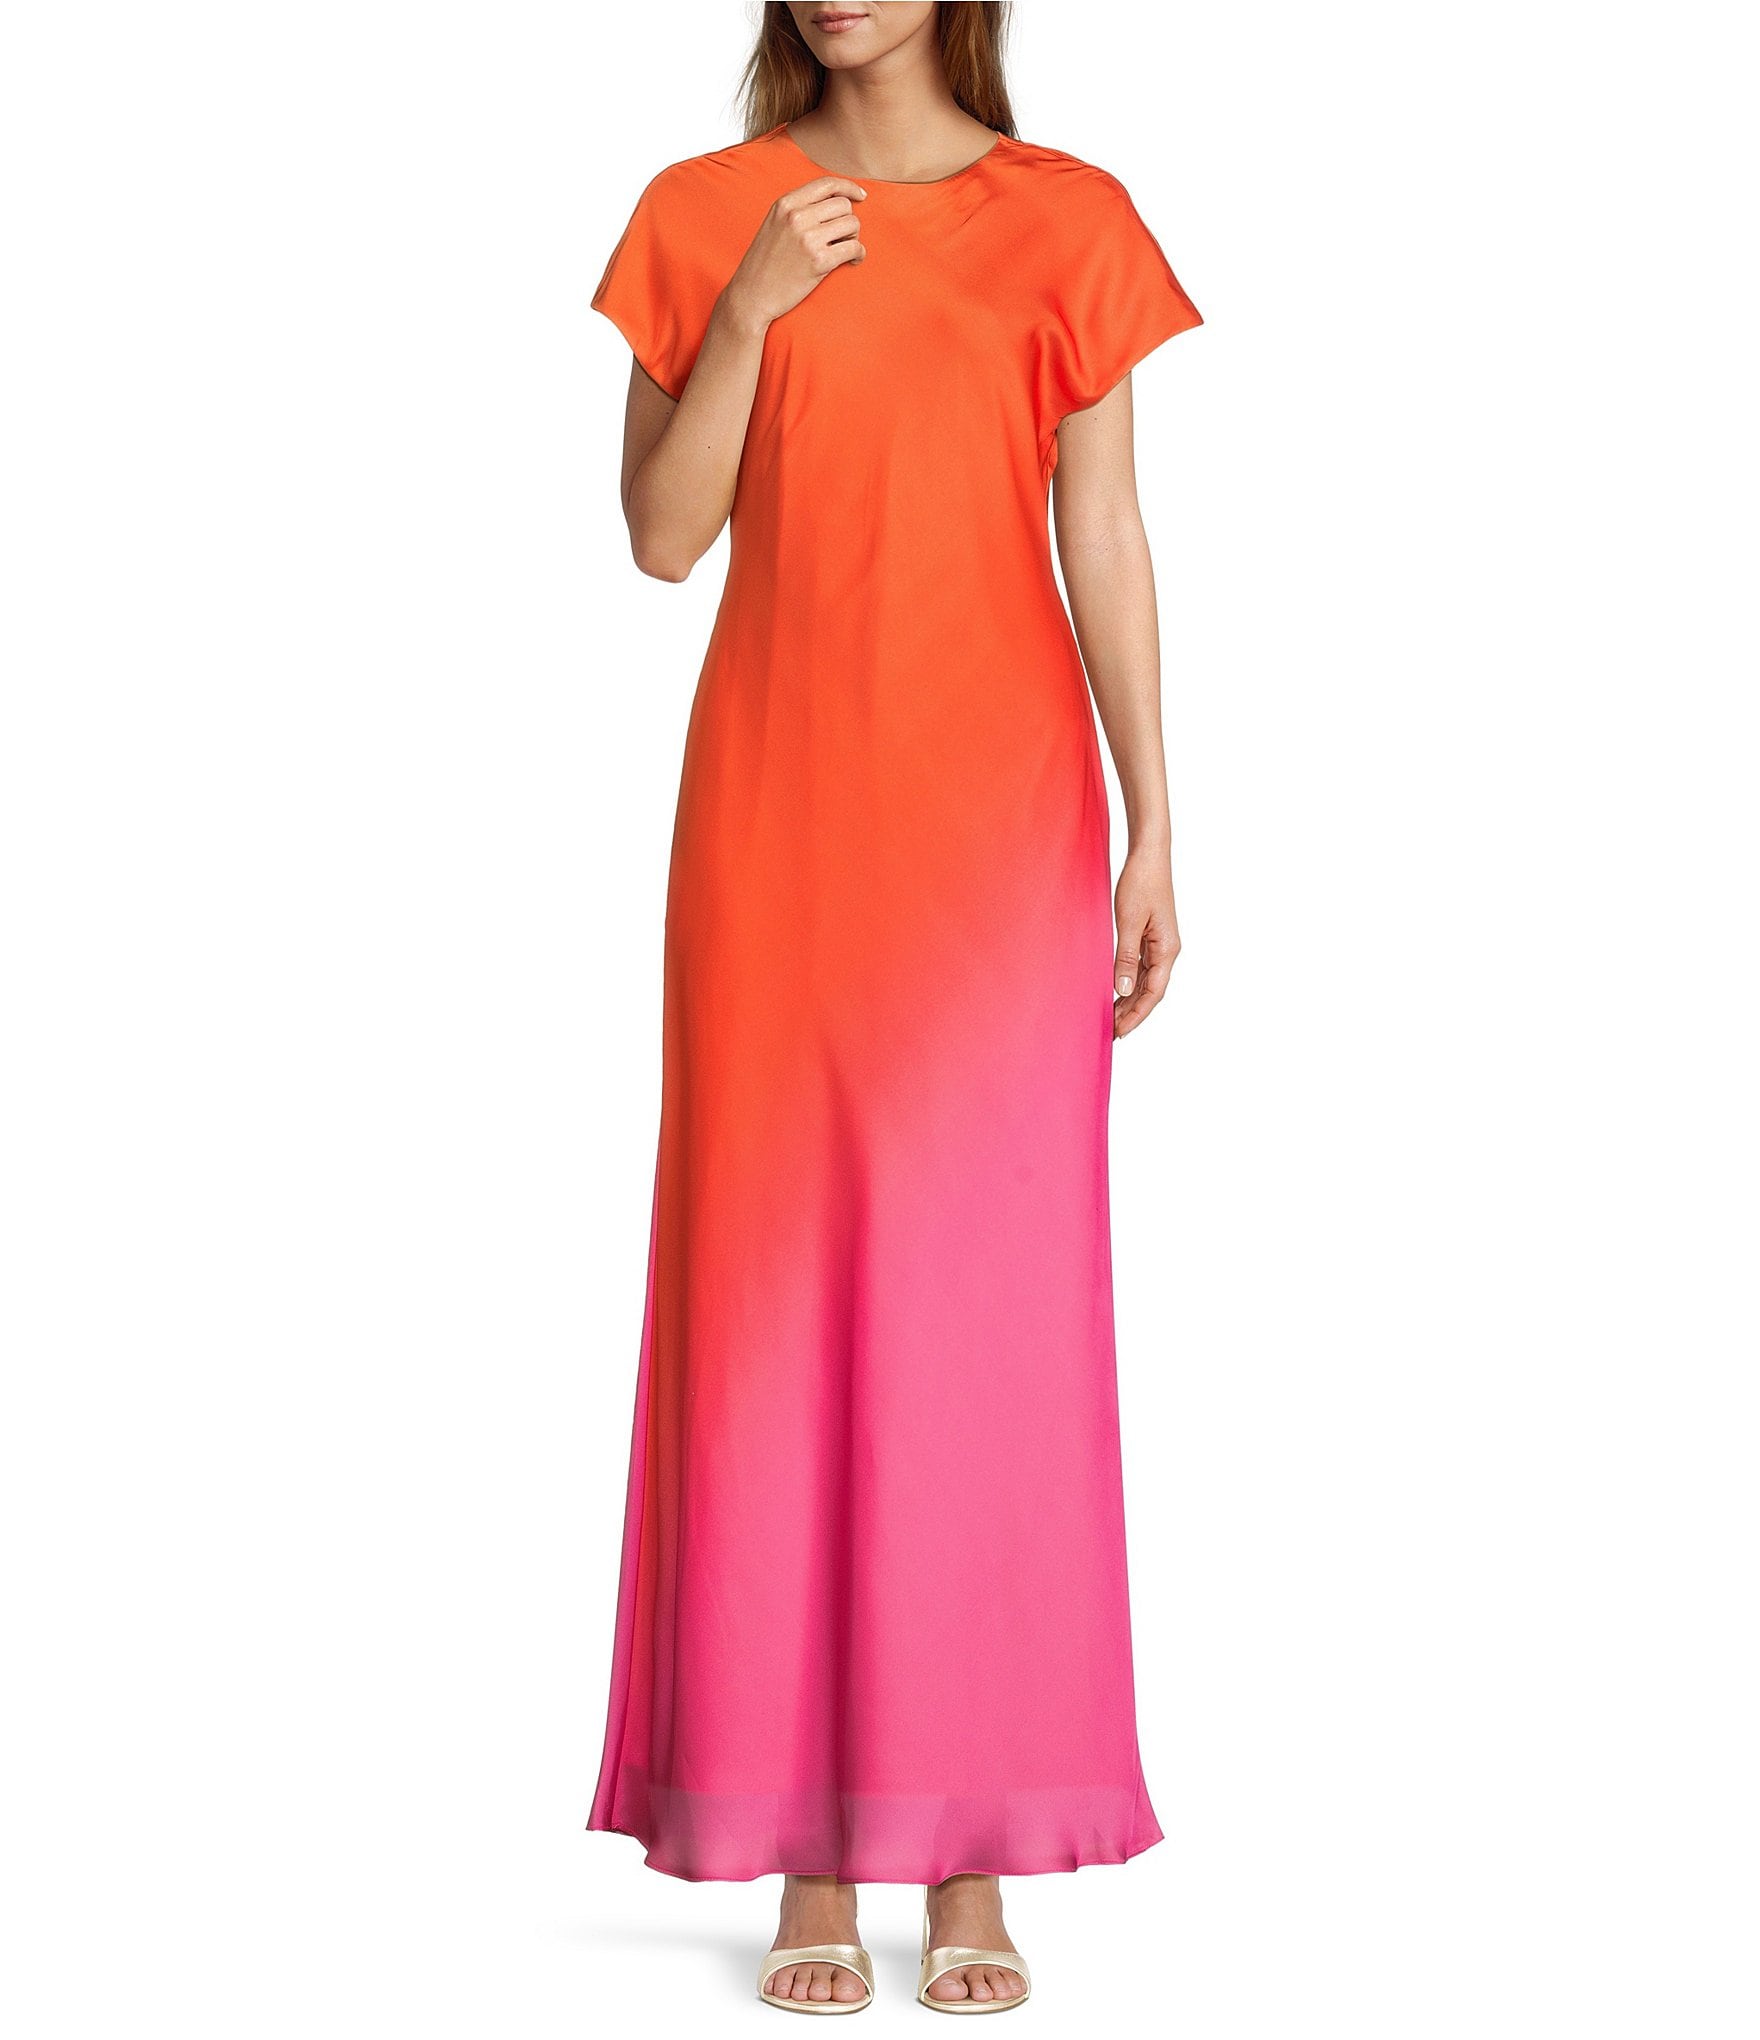 Boat Neck Women's Daytime & Casual Dresses